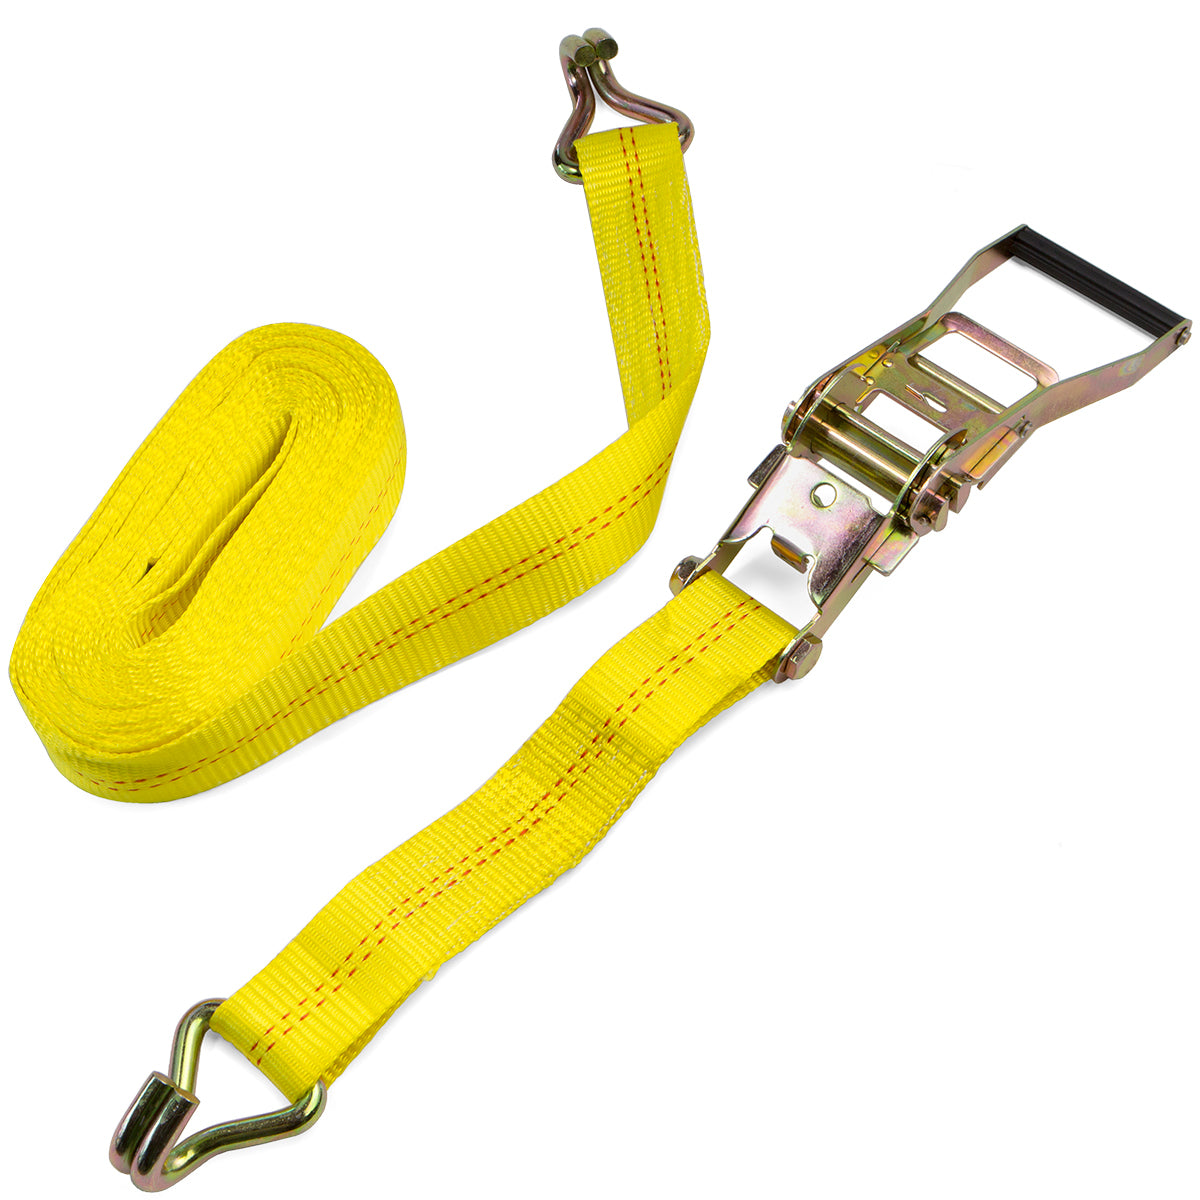 FITHOIST 2 Pack 8 inch J Hook | Short Tow Hook On Coupling Link | Yellow Zinc Plated J Tow Hook with Link | Heavy Duty G70 Tow Axle Strap Wrecker